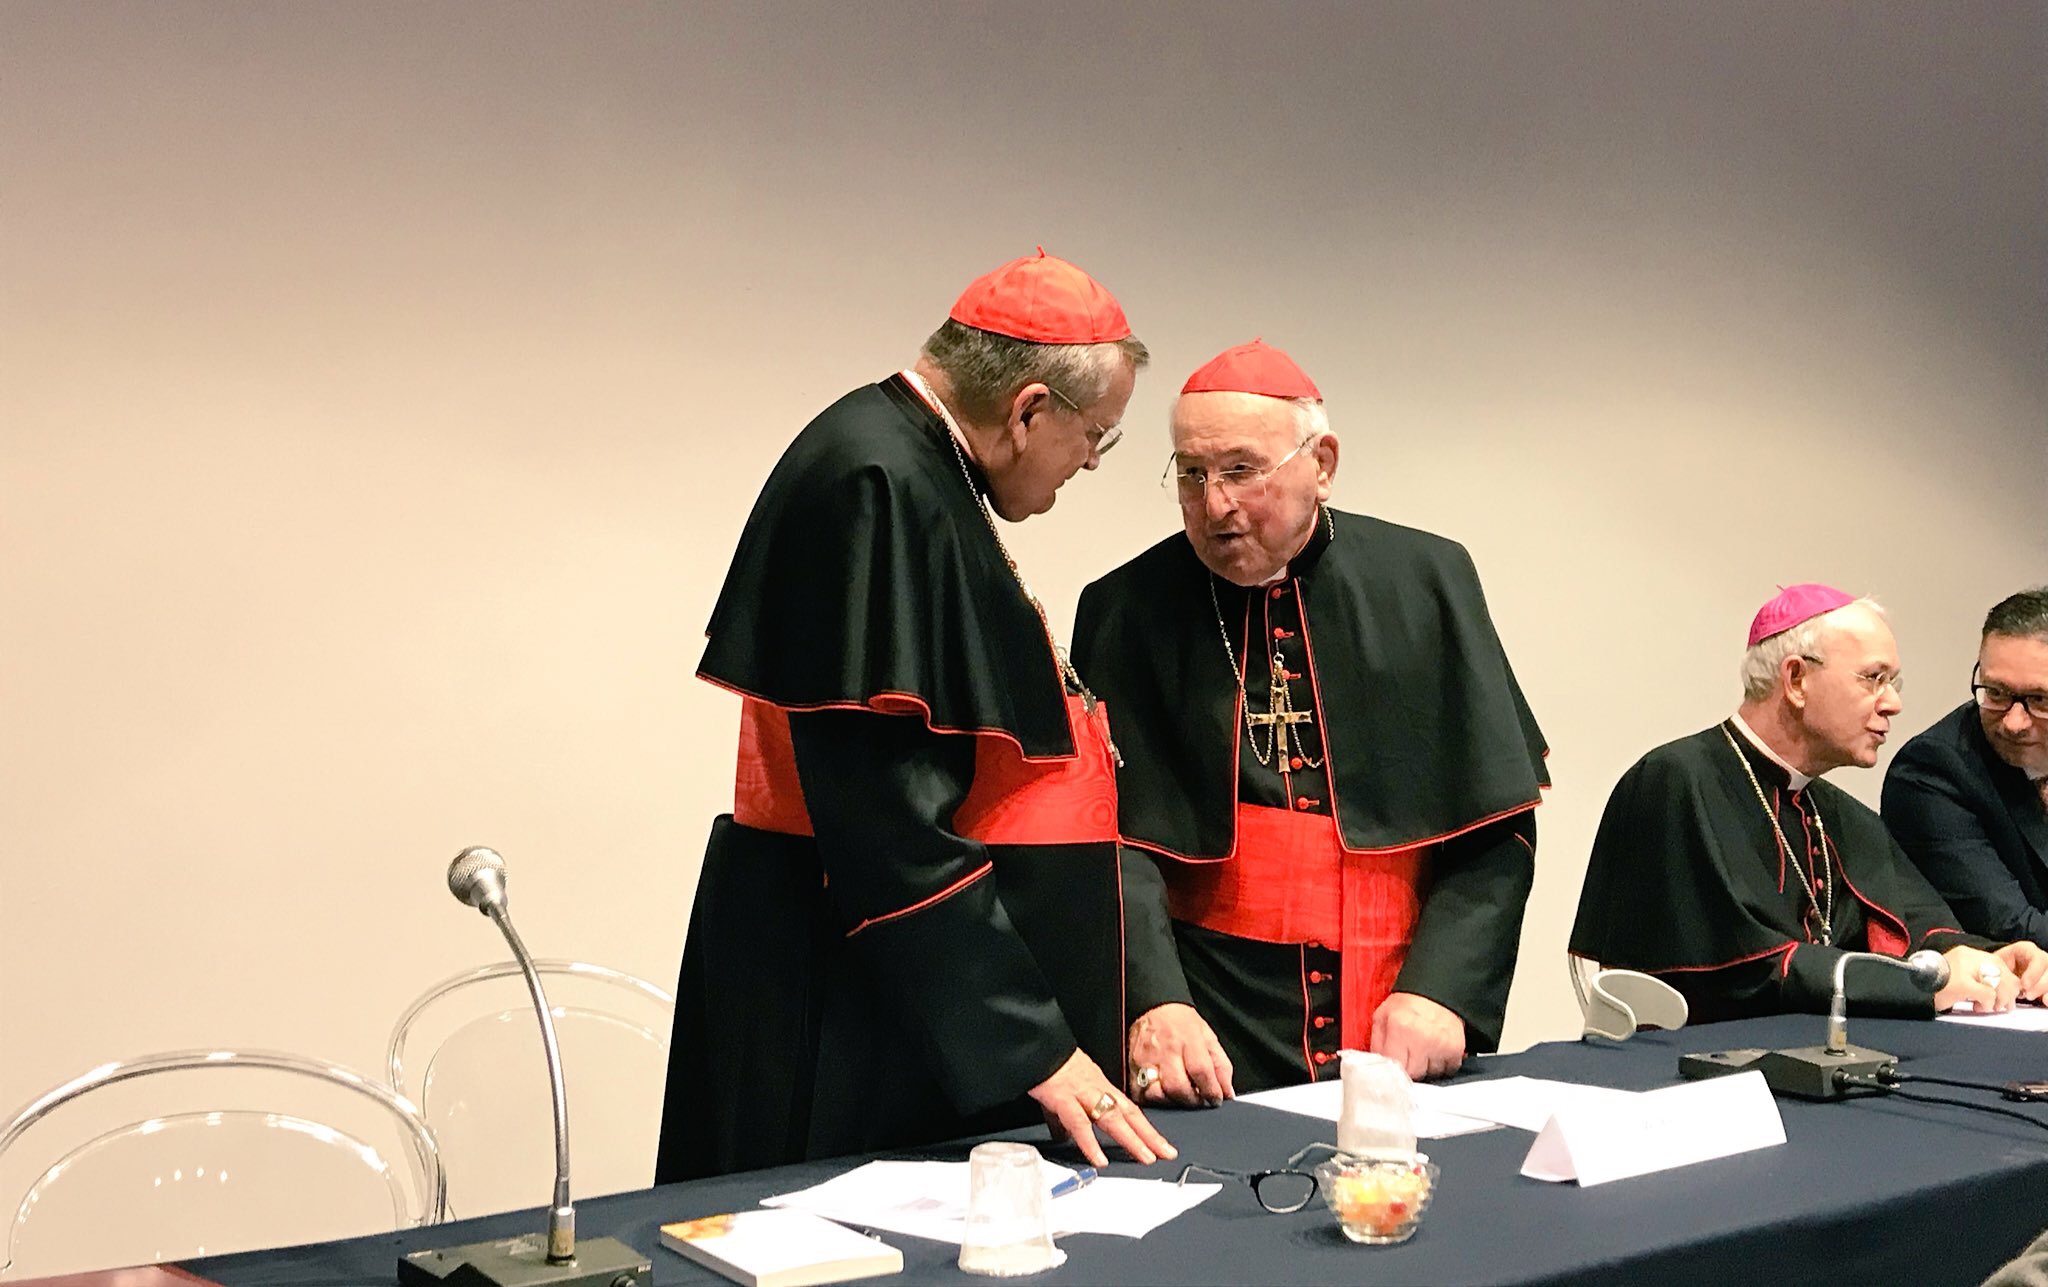 Cardinal Burke: There are times when a Pope must be disobeyed